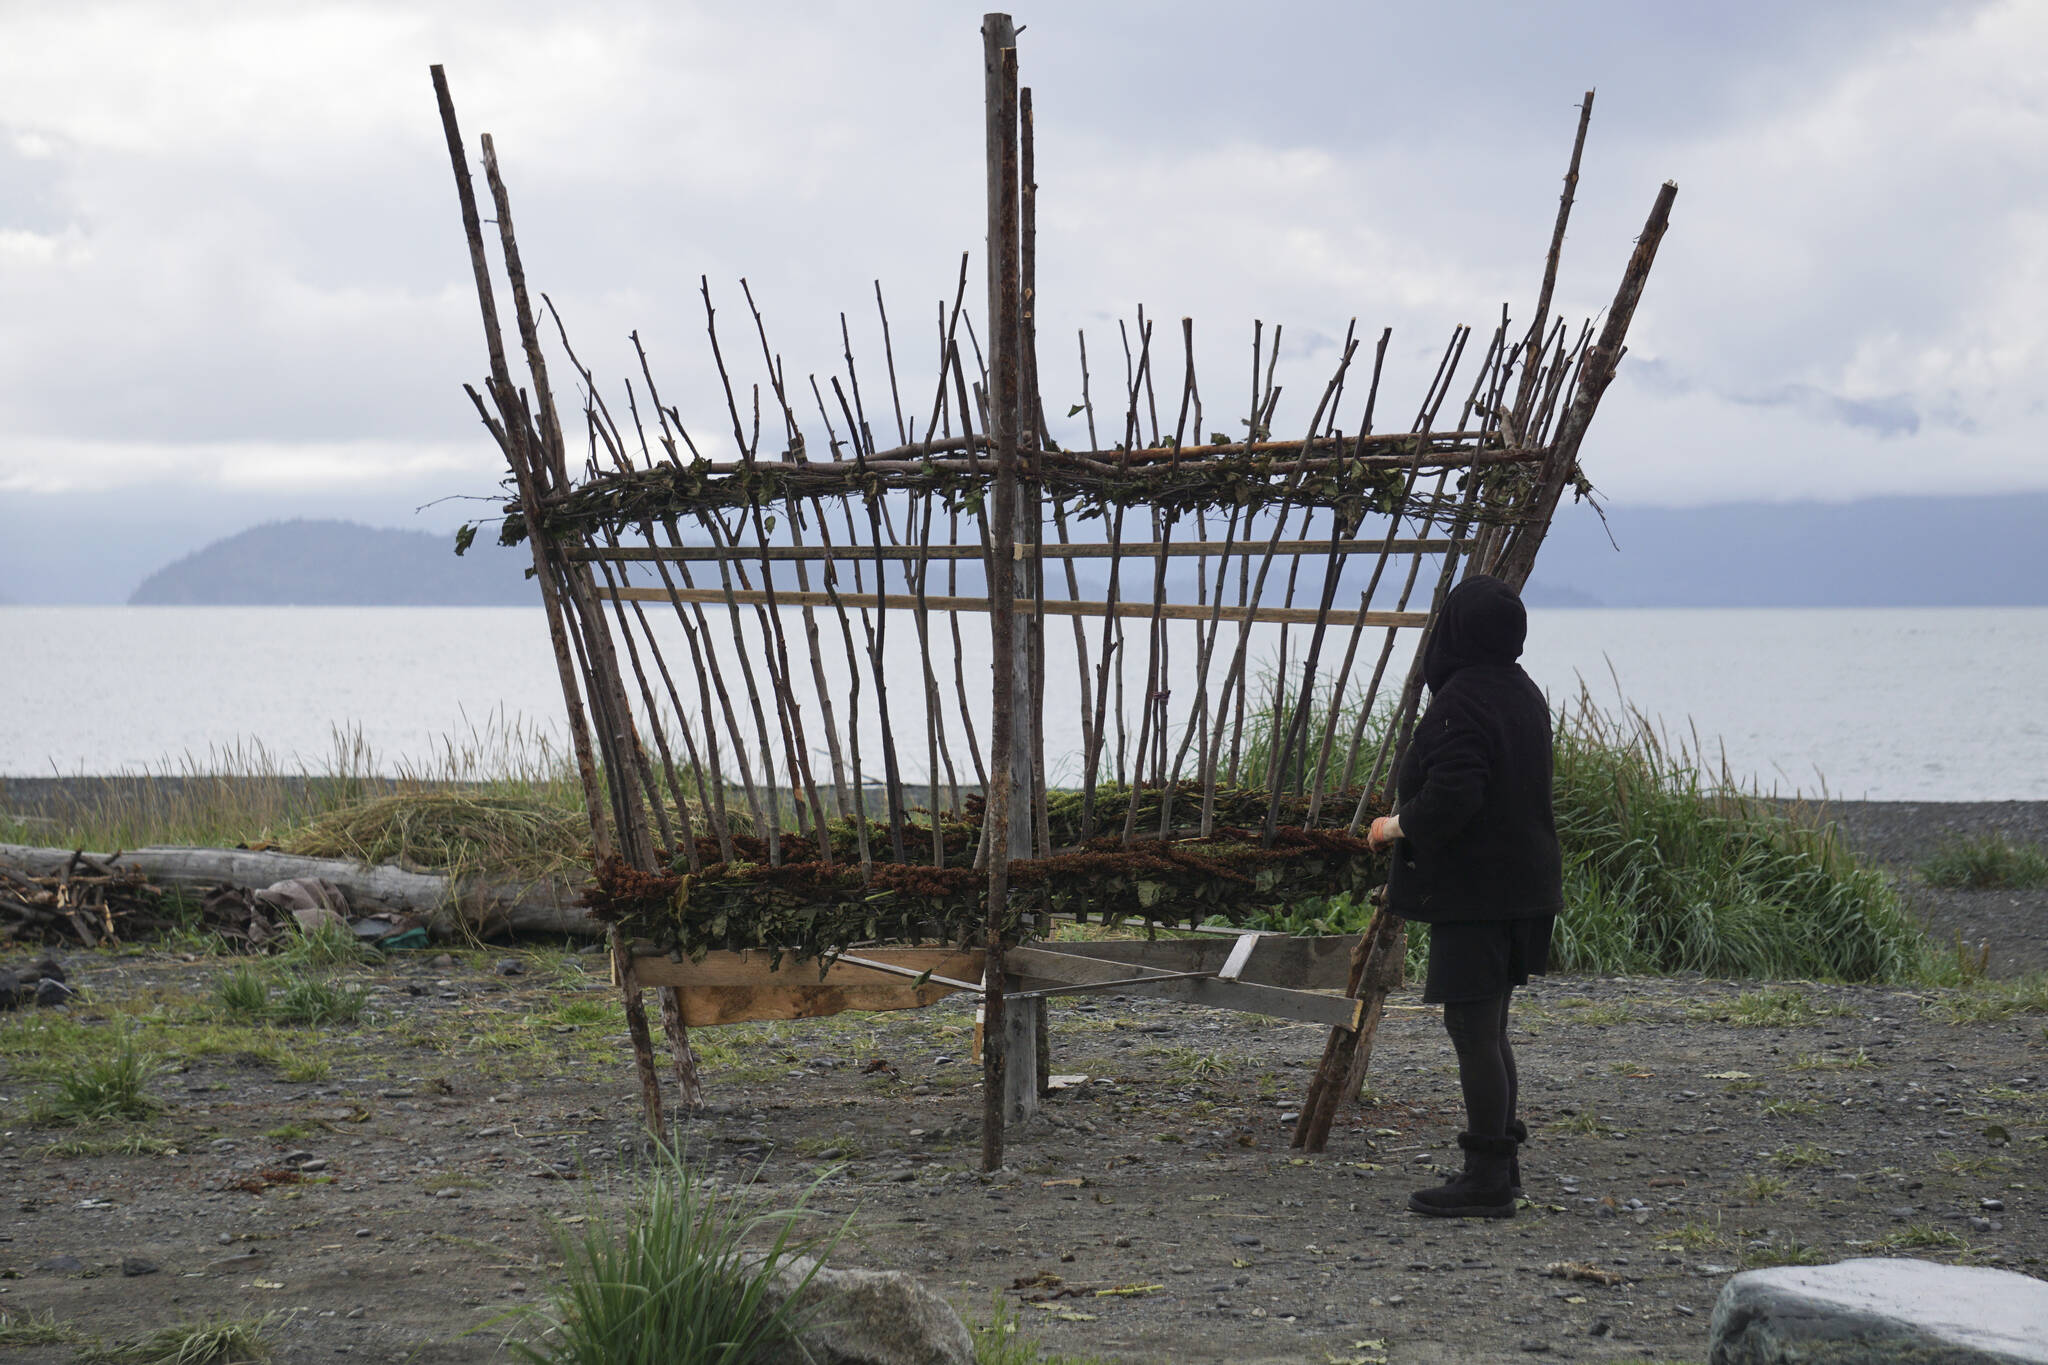 Burning Basket coordinator Mavis Muller, works on this this year’s Burning Basket, Breathe, on Tuesday, Sept. 6, 2022, at Mariner Park on the Homer Spit in Homer, Alaska. (Photo by Michael Armstrong/Homer News)